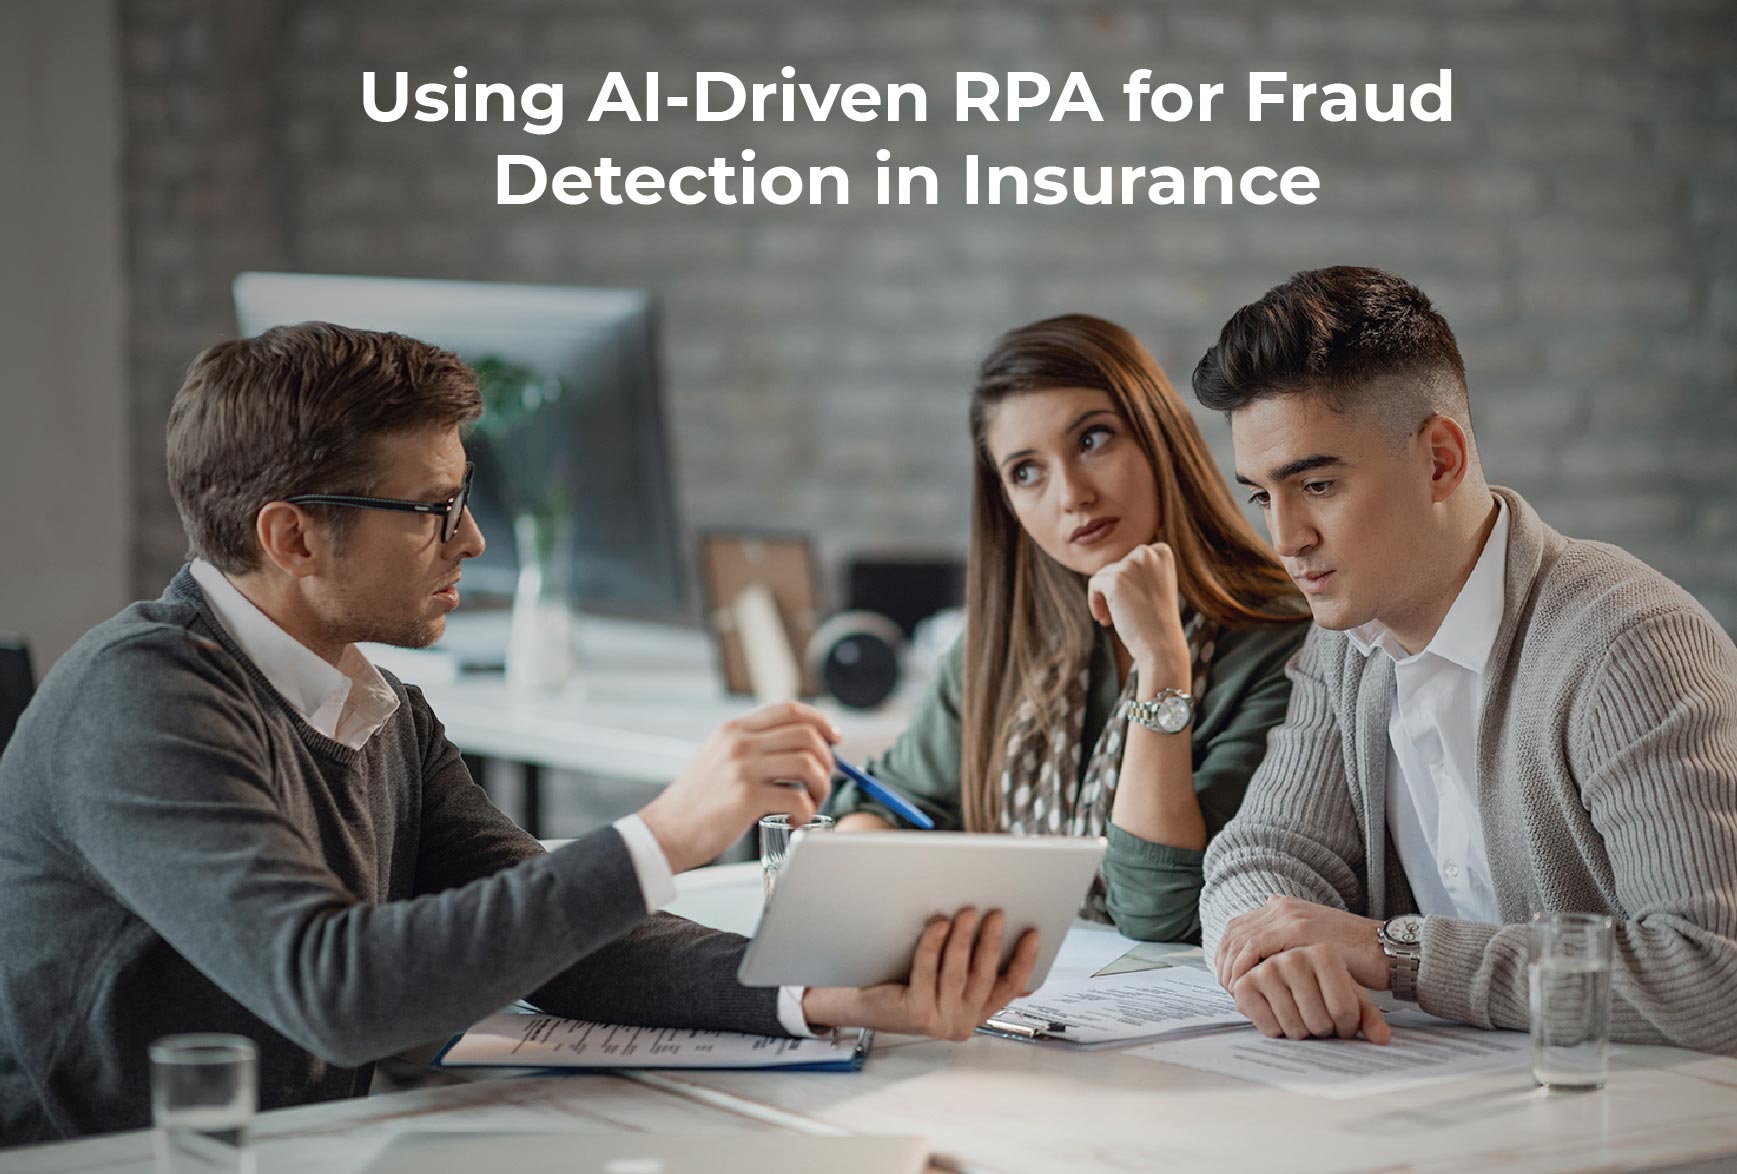 Using AI-Driven RPA for Fraud Detection in Insurance